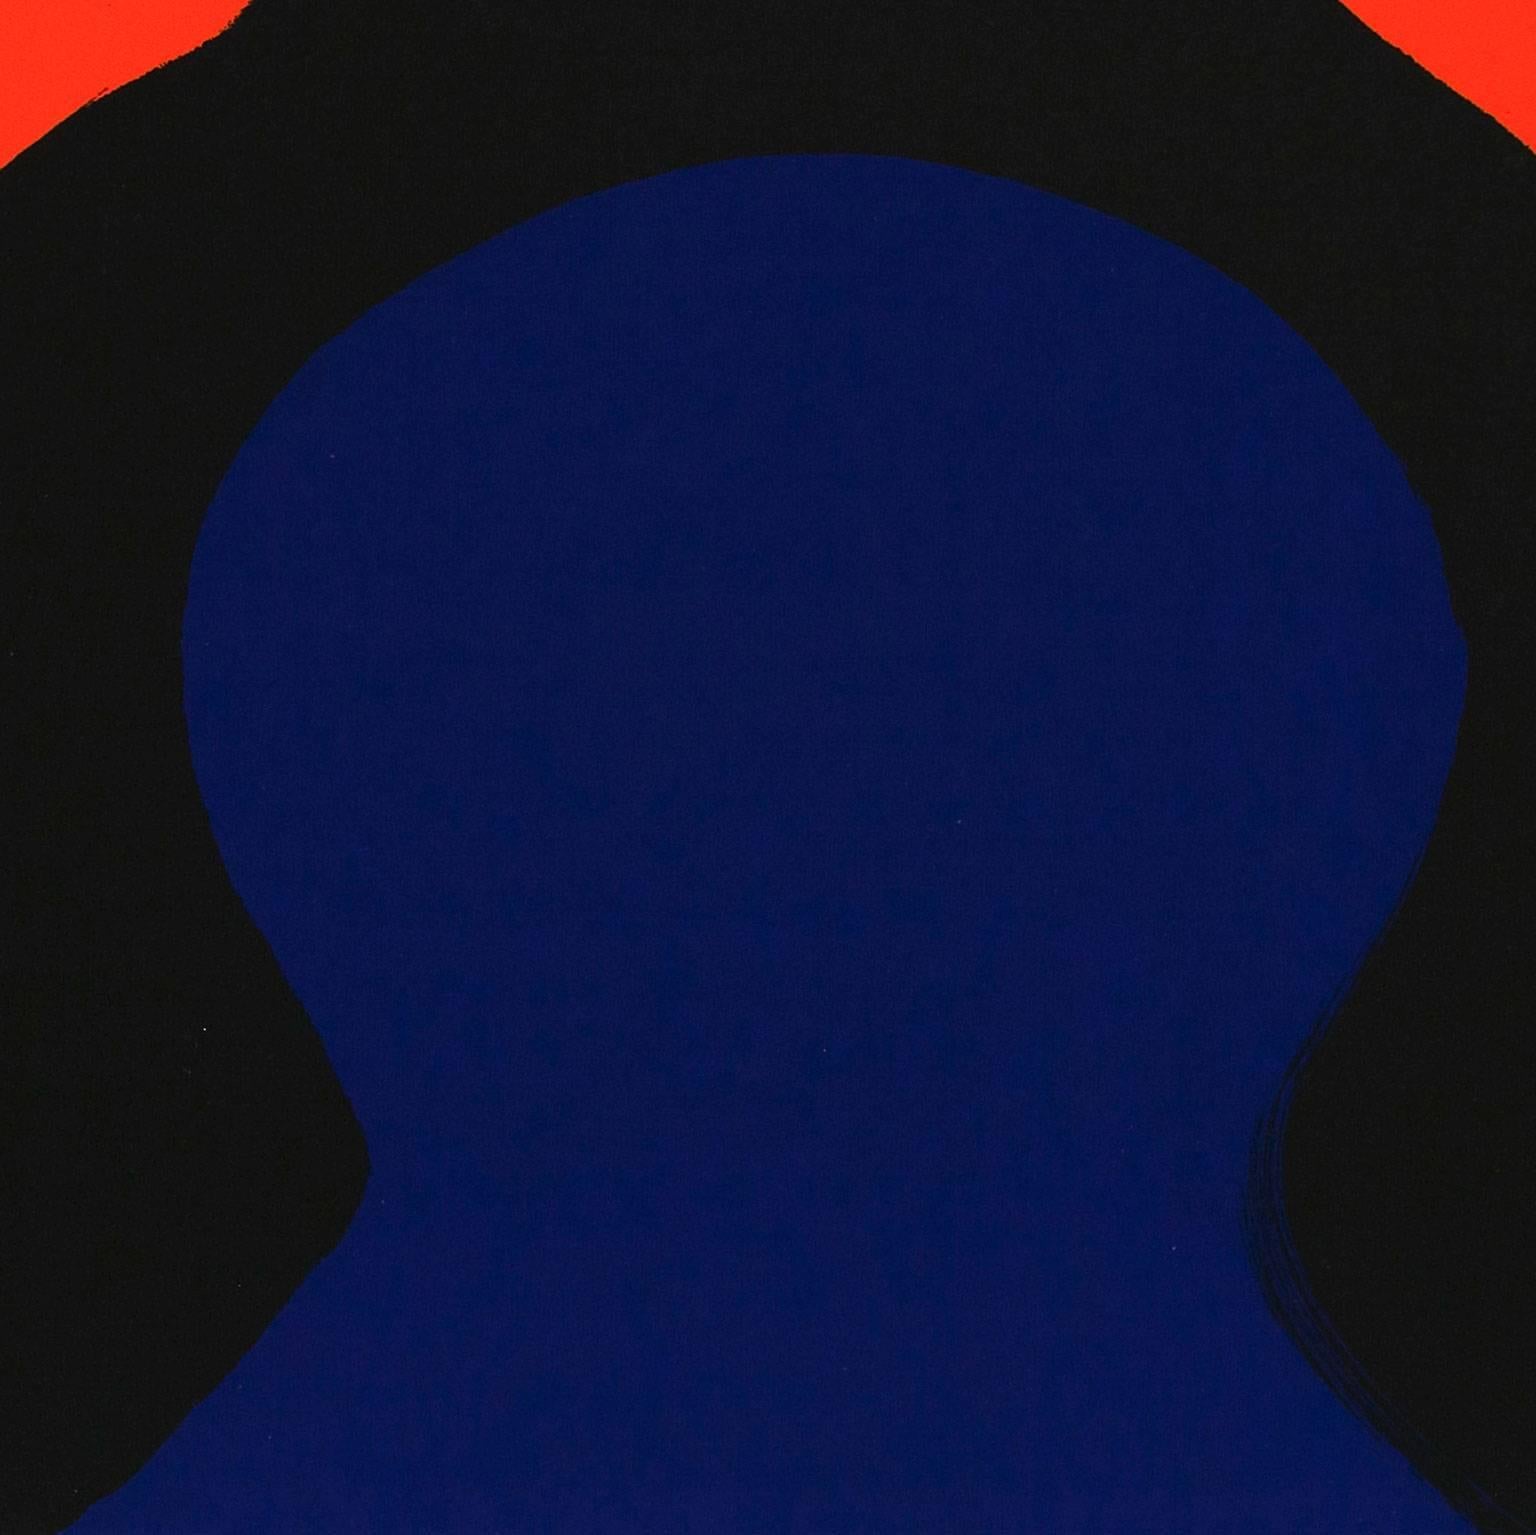 Otto Piene (1928-2014) was a leading German artist who specialized in abstraction, kinetic and technology-based art. 

Alongside Heinz Mack, he established the legendary artists group ZERO in 1957. The group sought to redefine art after WWII